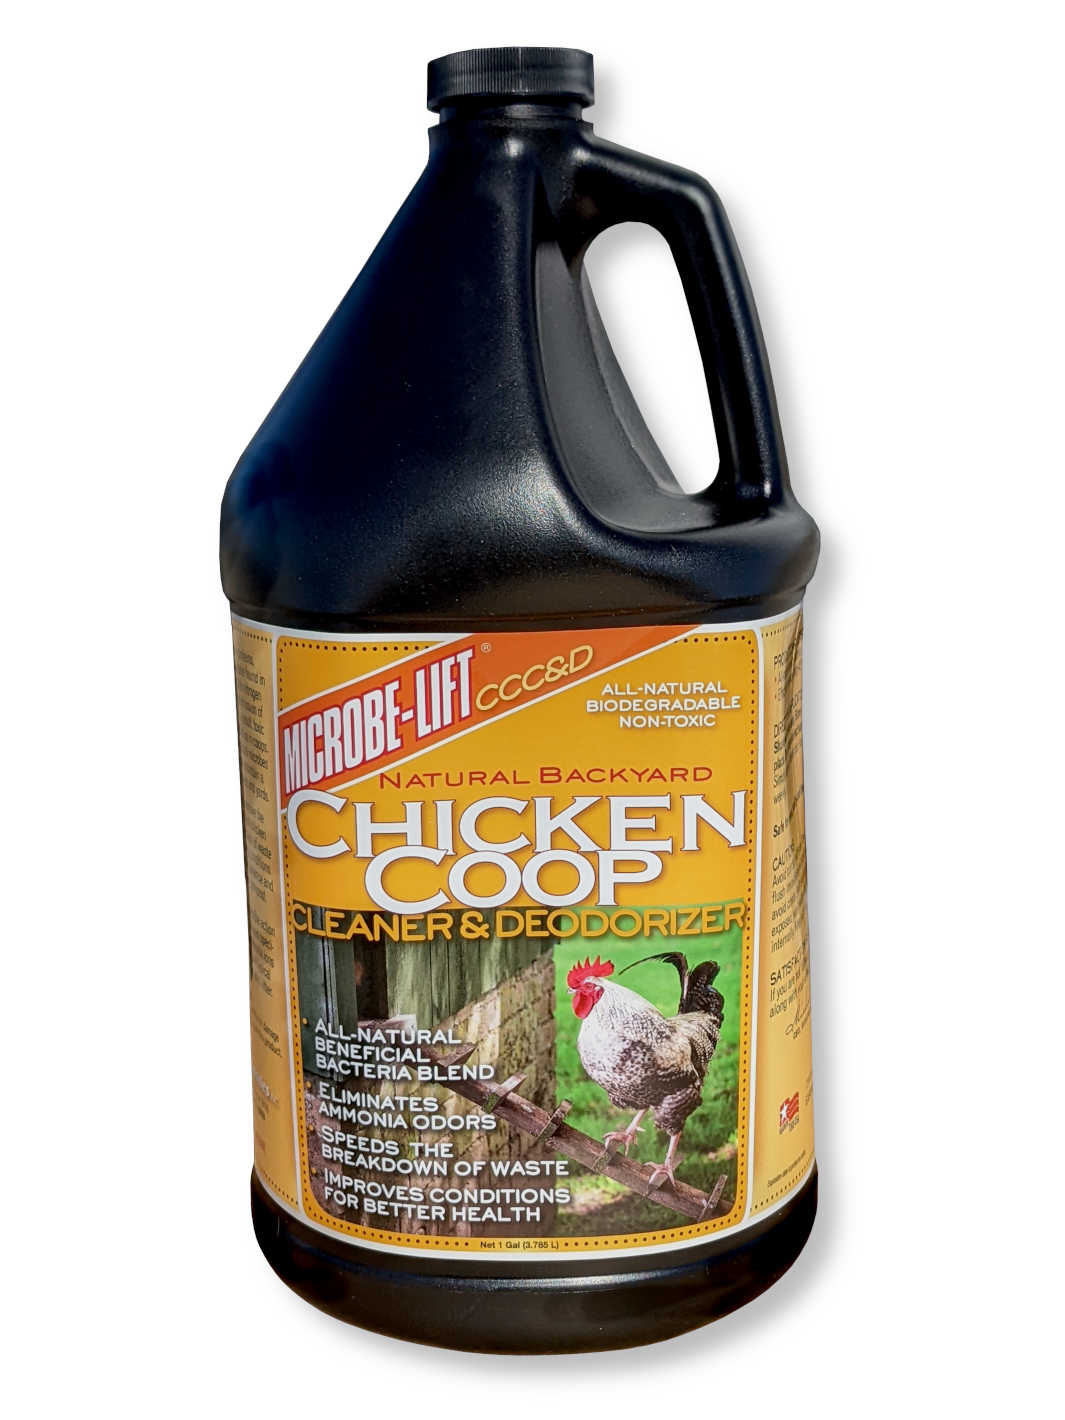 Microbe-Lift Chicken Cleaner and Deodorizer to Clean Coop